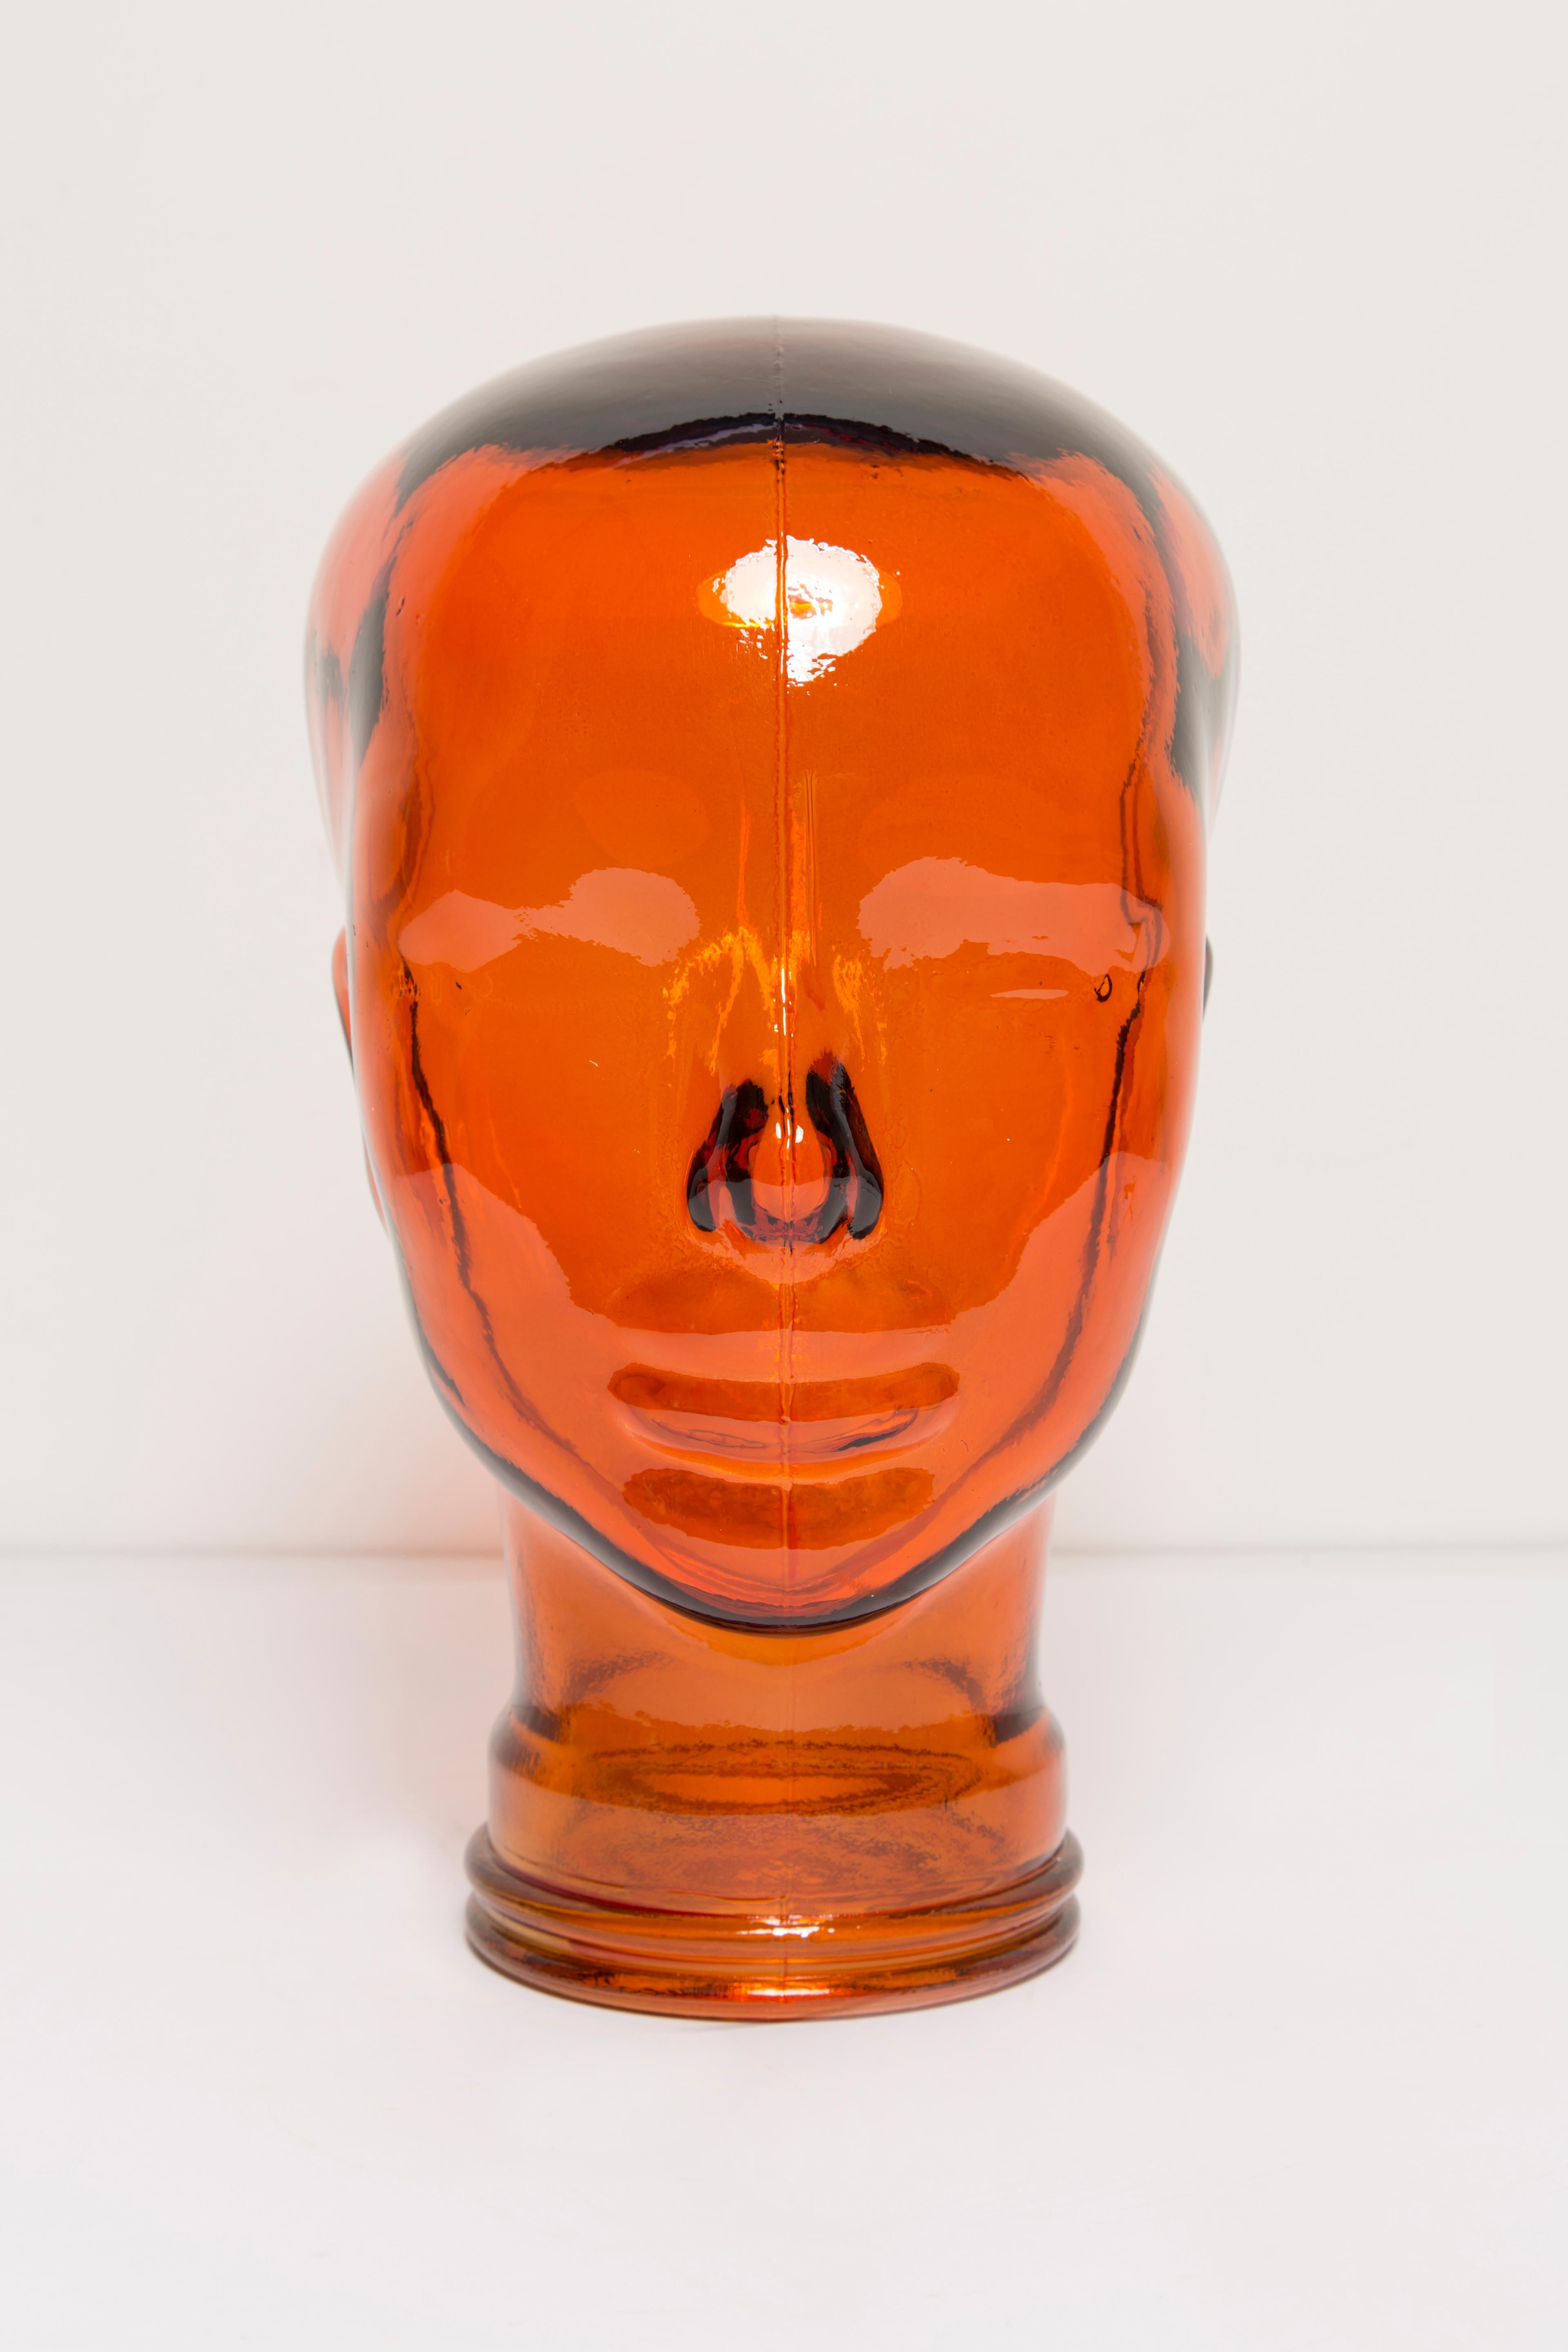 Life-size glass head in a unique orange color. Produced in a German steelworks in the 1970s. Perfect condition. A perfect addition to the interior, photo prop, display or headphone stand.